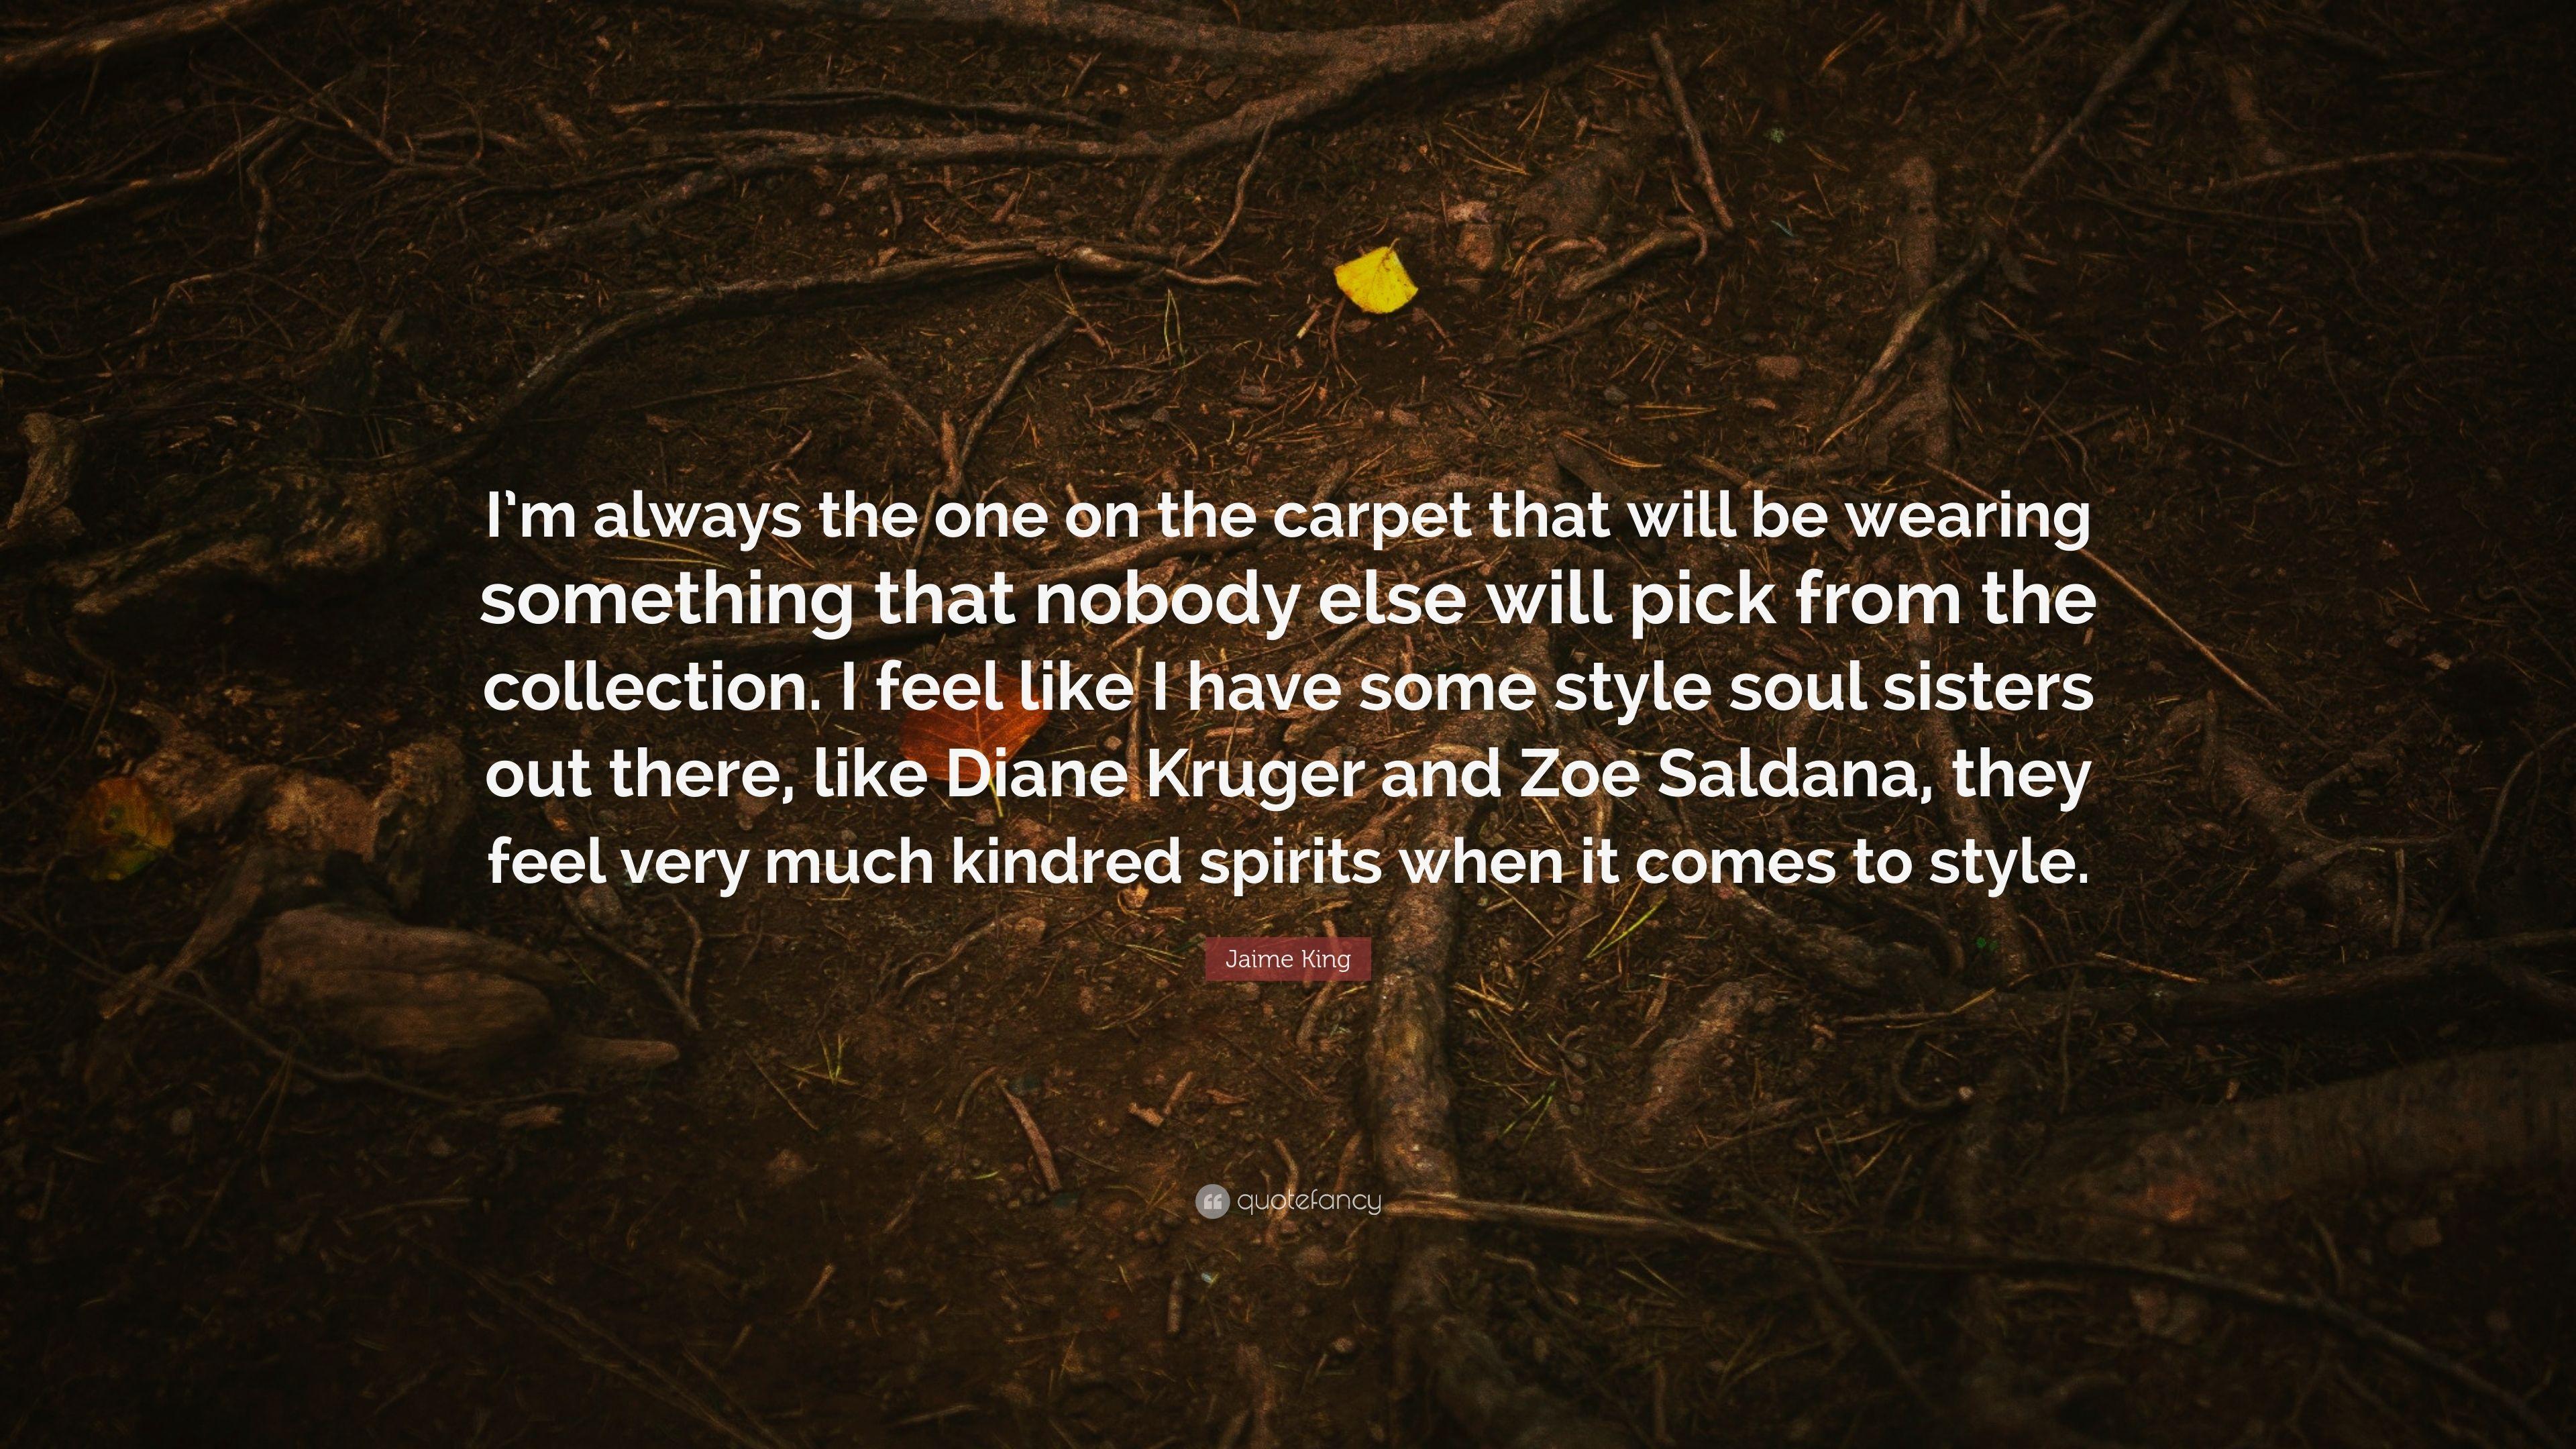 Jaime King Quote: “I'm always the one on the carpet that will be